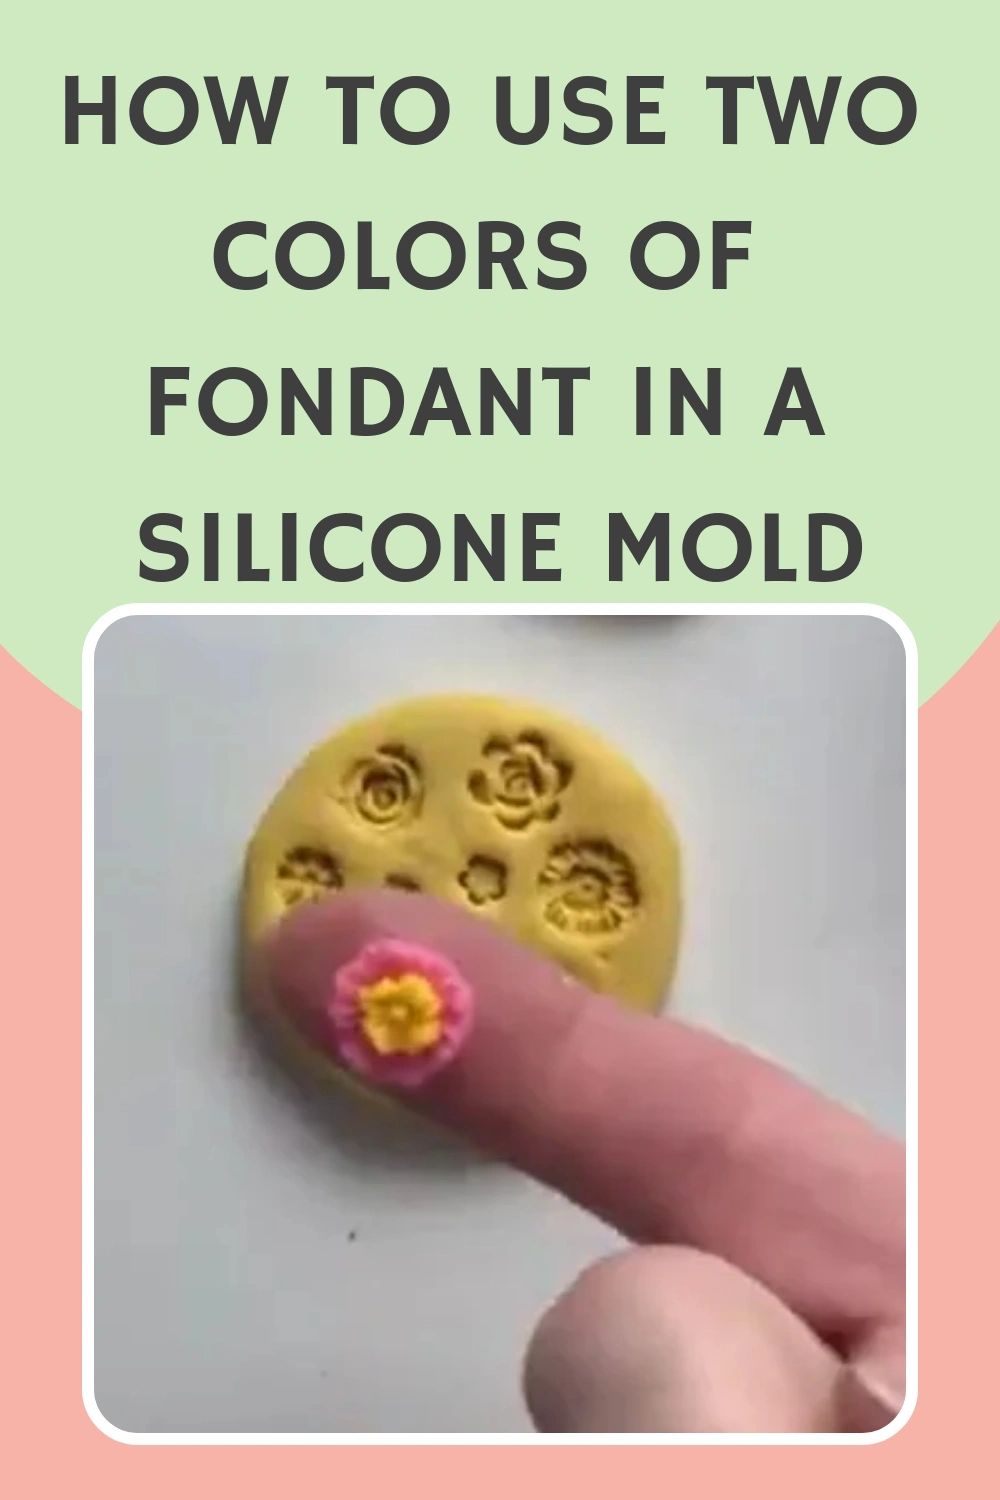 https://img1.wsimg.com/isteam/ip/2e67919d-5f98-41a3-921e-2716f8646f4c/How-To-Use-Two-Colors-Of-Fondant-In-A-Silicon.jpeg